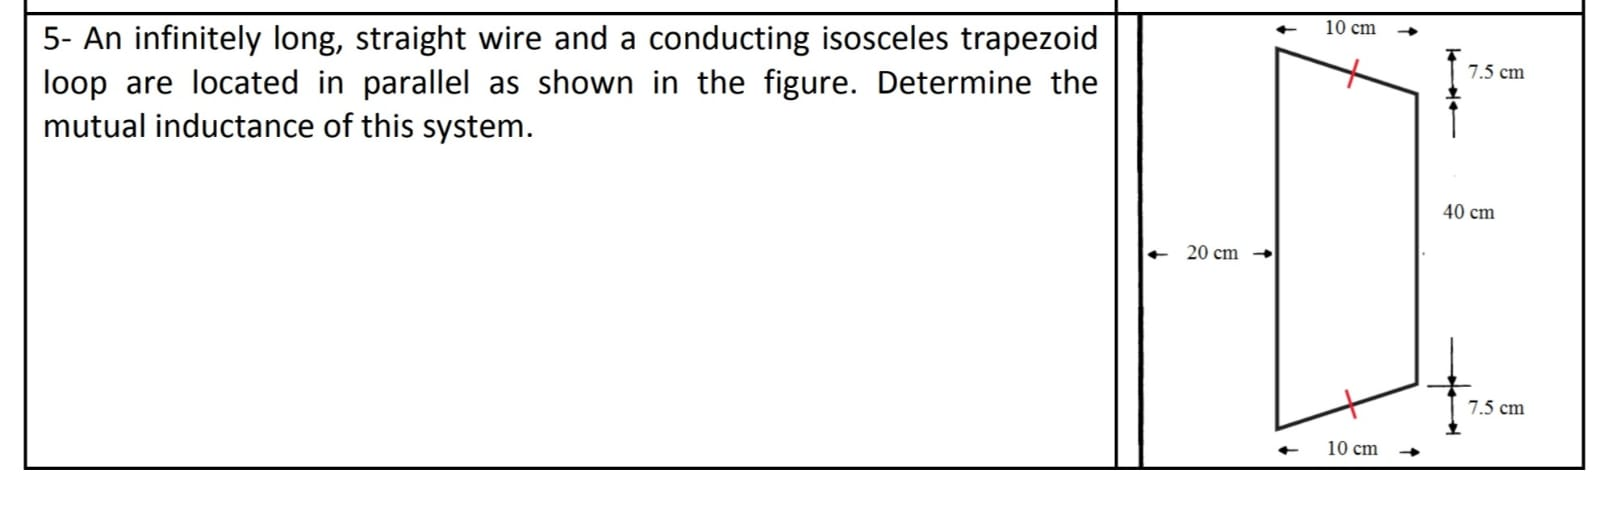 10 cm
5- An infinitely long, straight wire and a conducting isosceles trapezoid
loop are located in parallel as shown in the figure. Determine the
mutual inductance of this system.
7.5 cm
40 cm
20 cm
7.5 cm
10 cm
